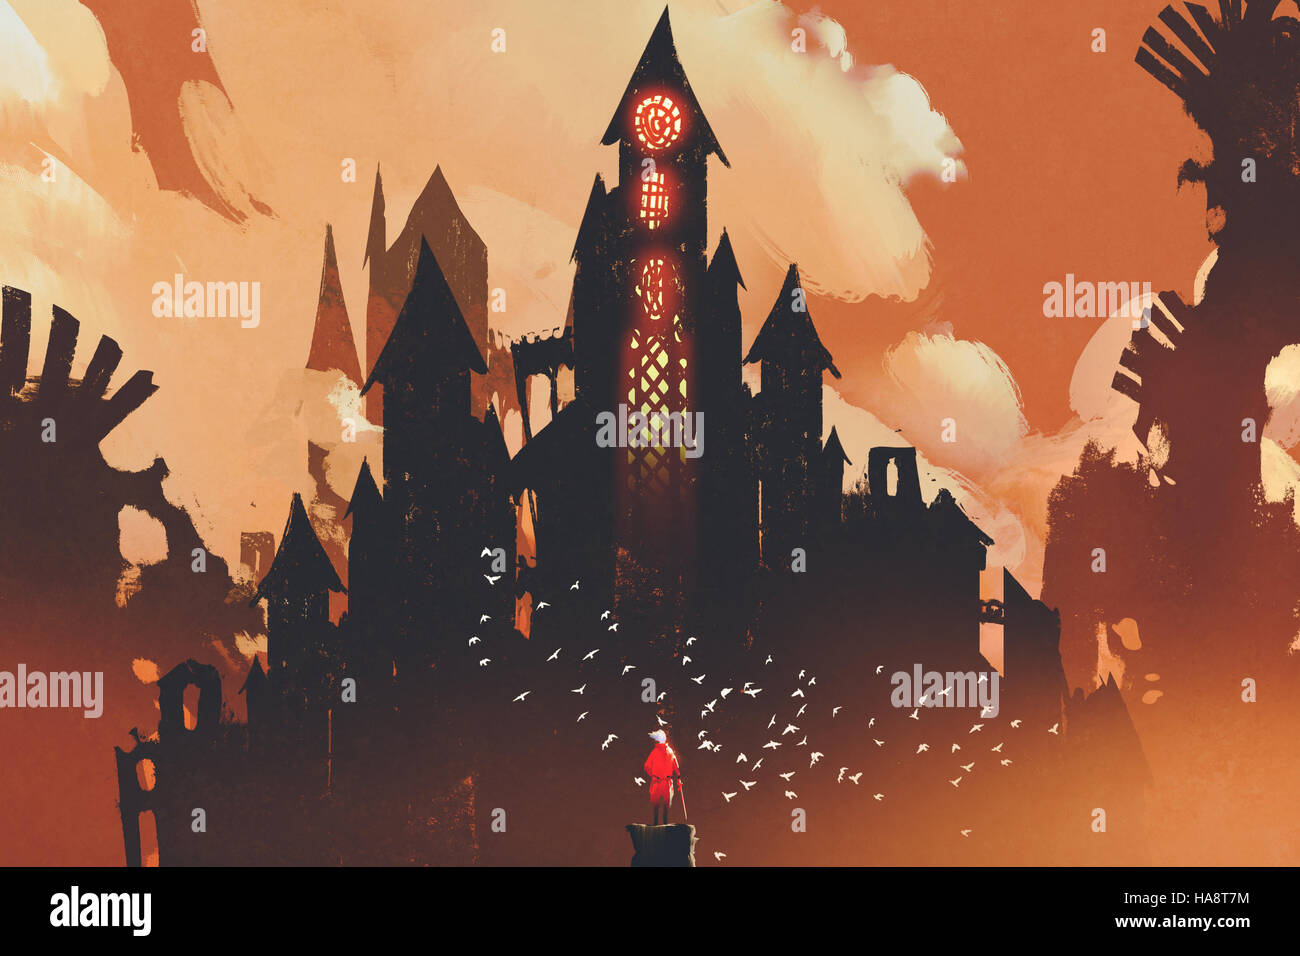 red knight standing in front of fantasy castle in the background of orange clouds,illustration painting Stock Photo